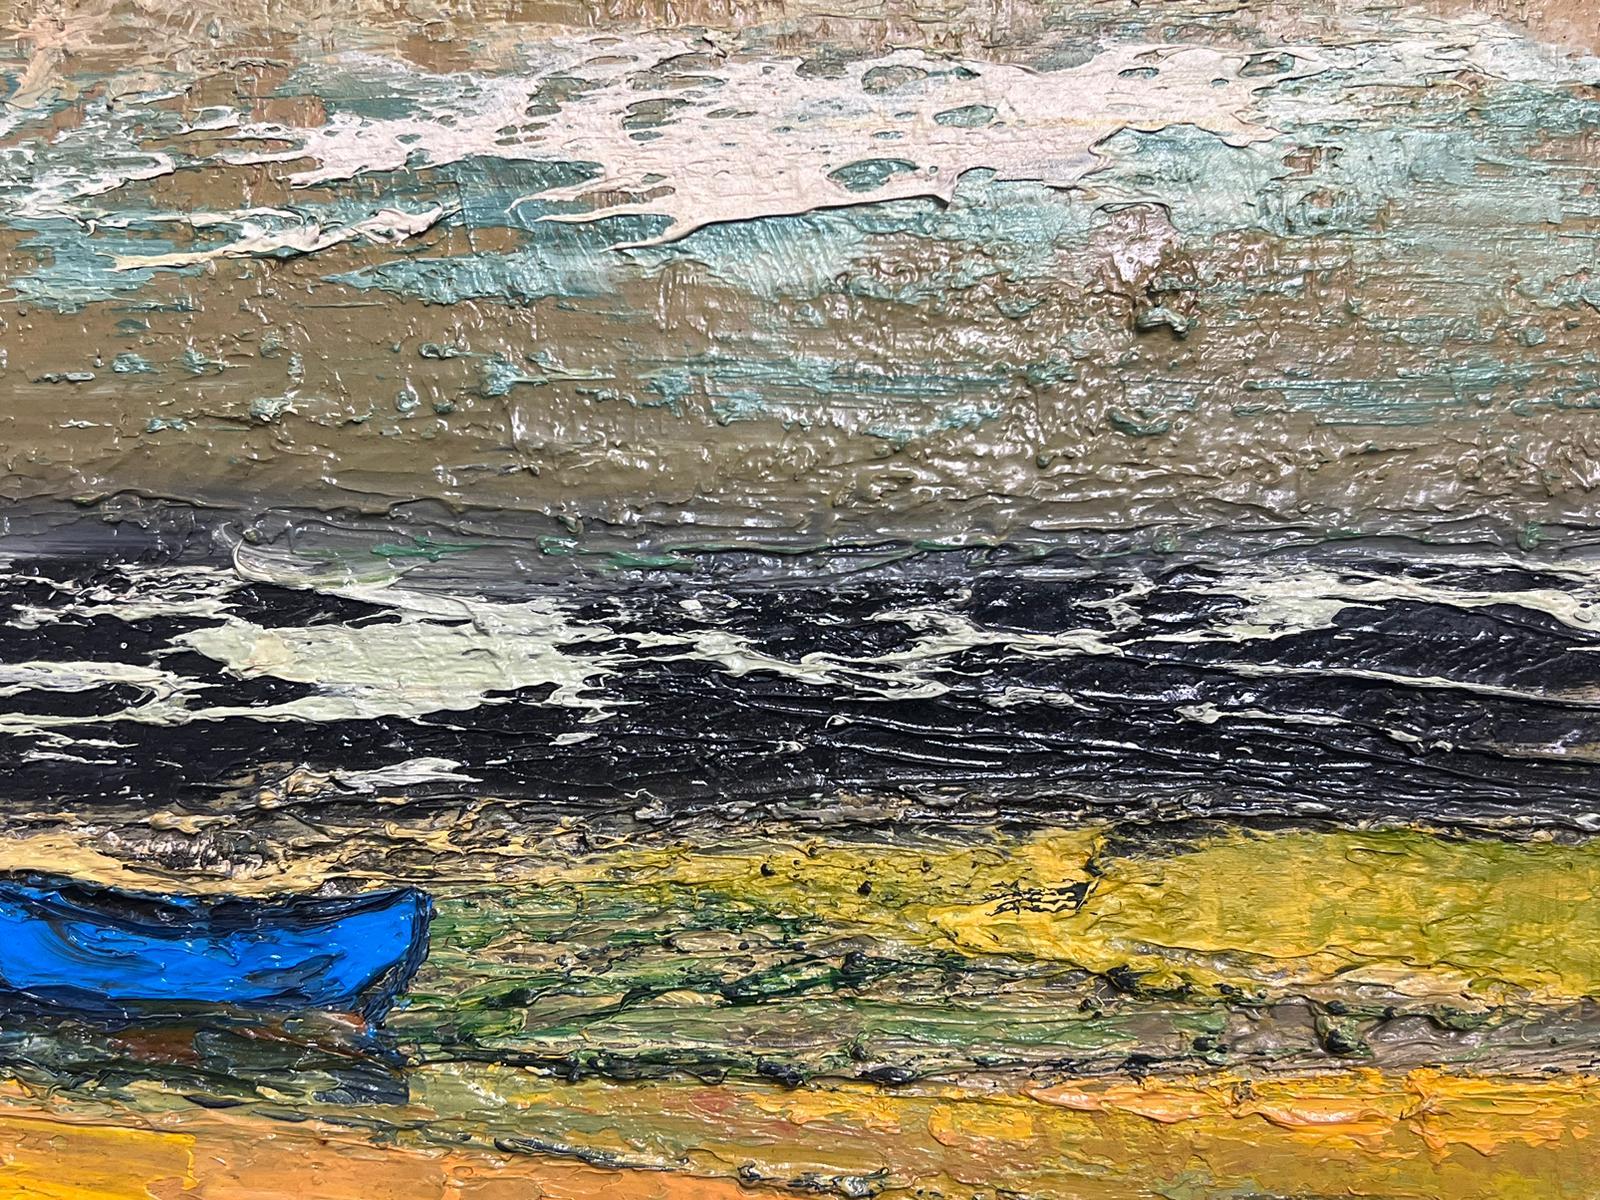 Moored Boat on the Beach
signed by Lucien Gondret (French 1941-2023)
signed oil on canvas, unframed
canvas: 9 x 13 inches
provenance: the artists estate, France
condition: very good and sound condition